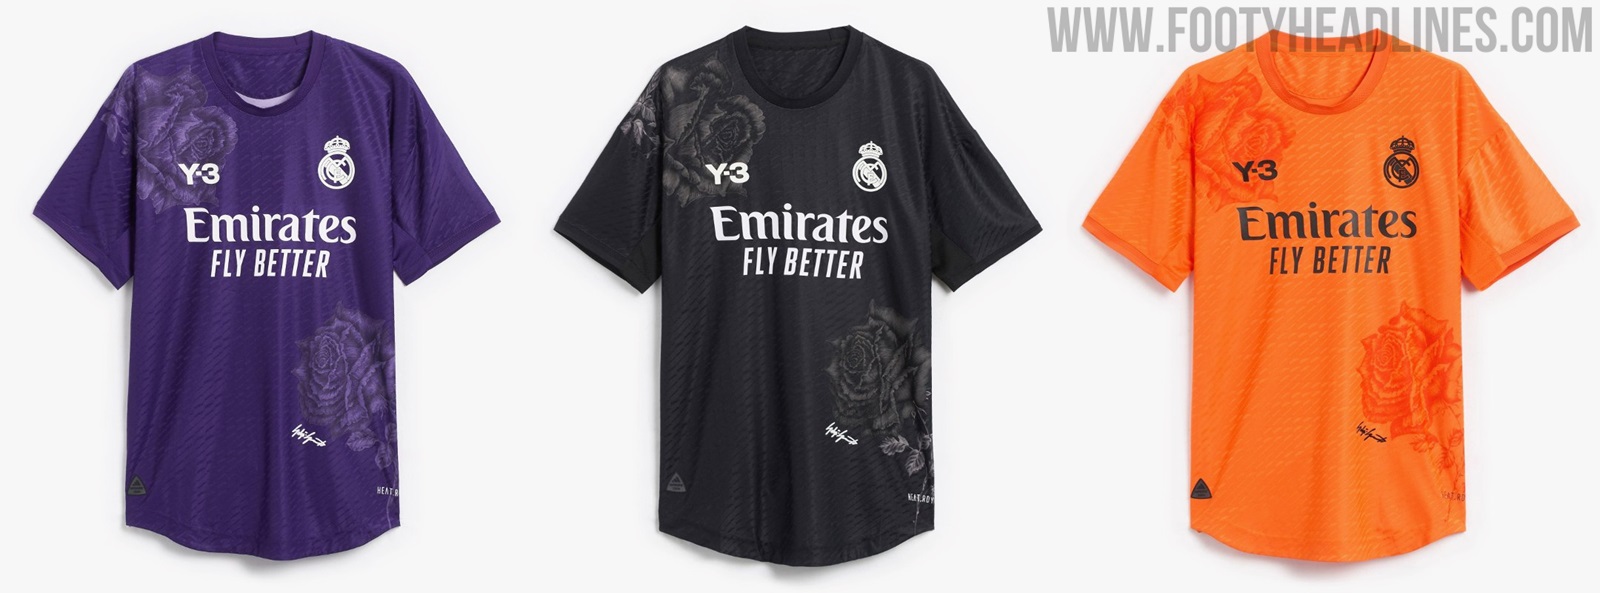 y3 real madrid jersey